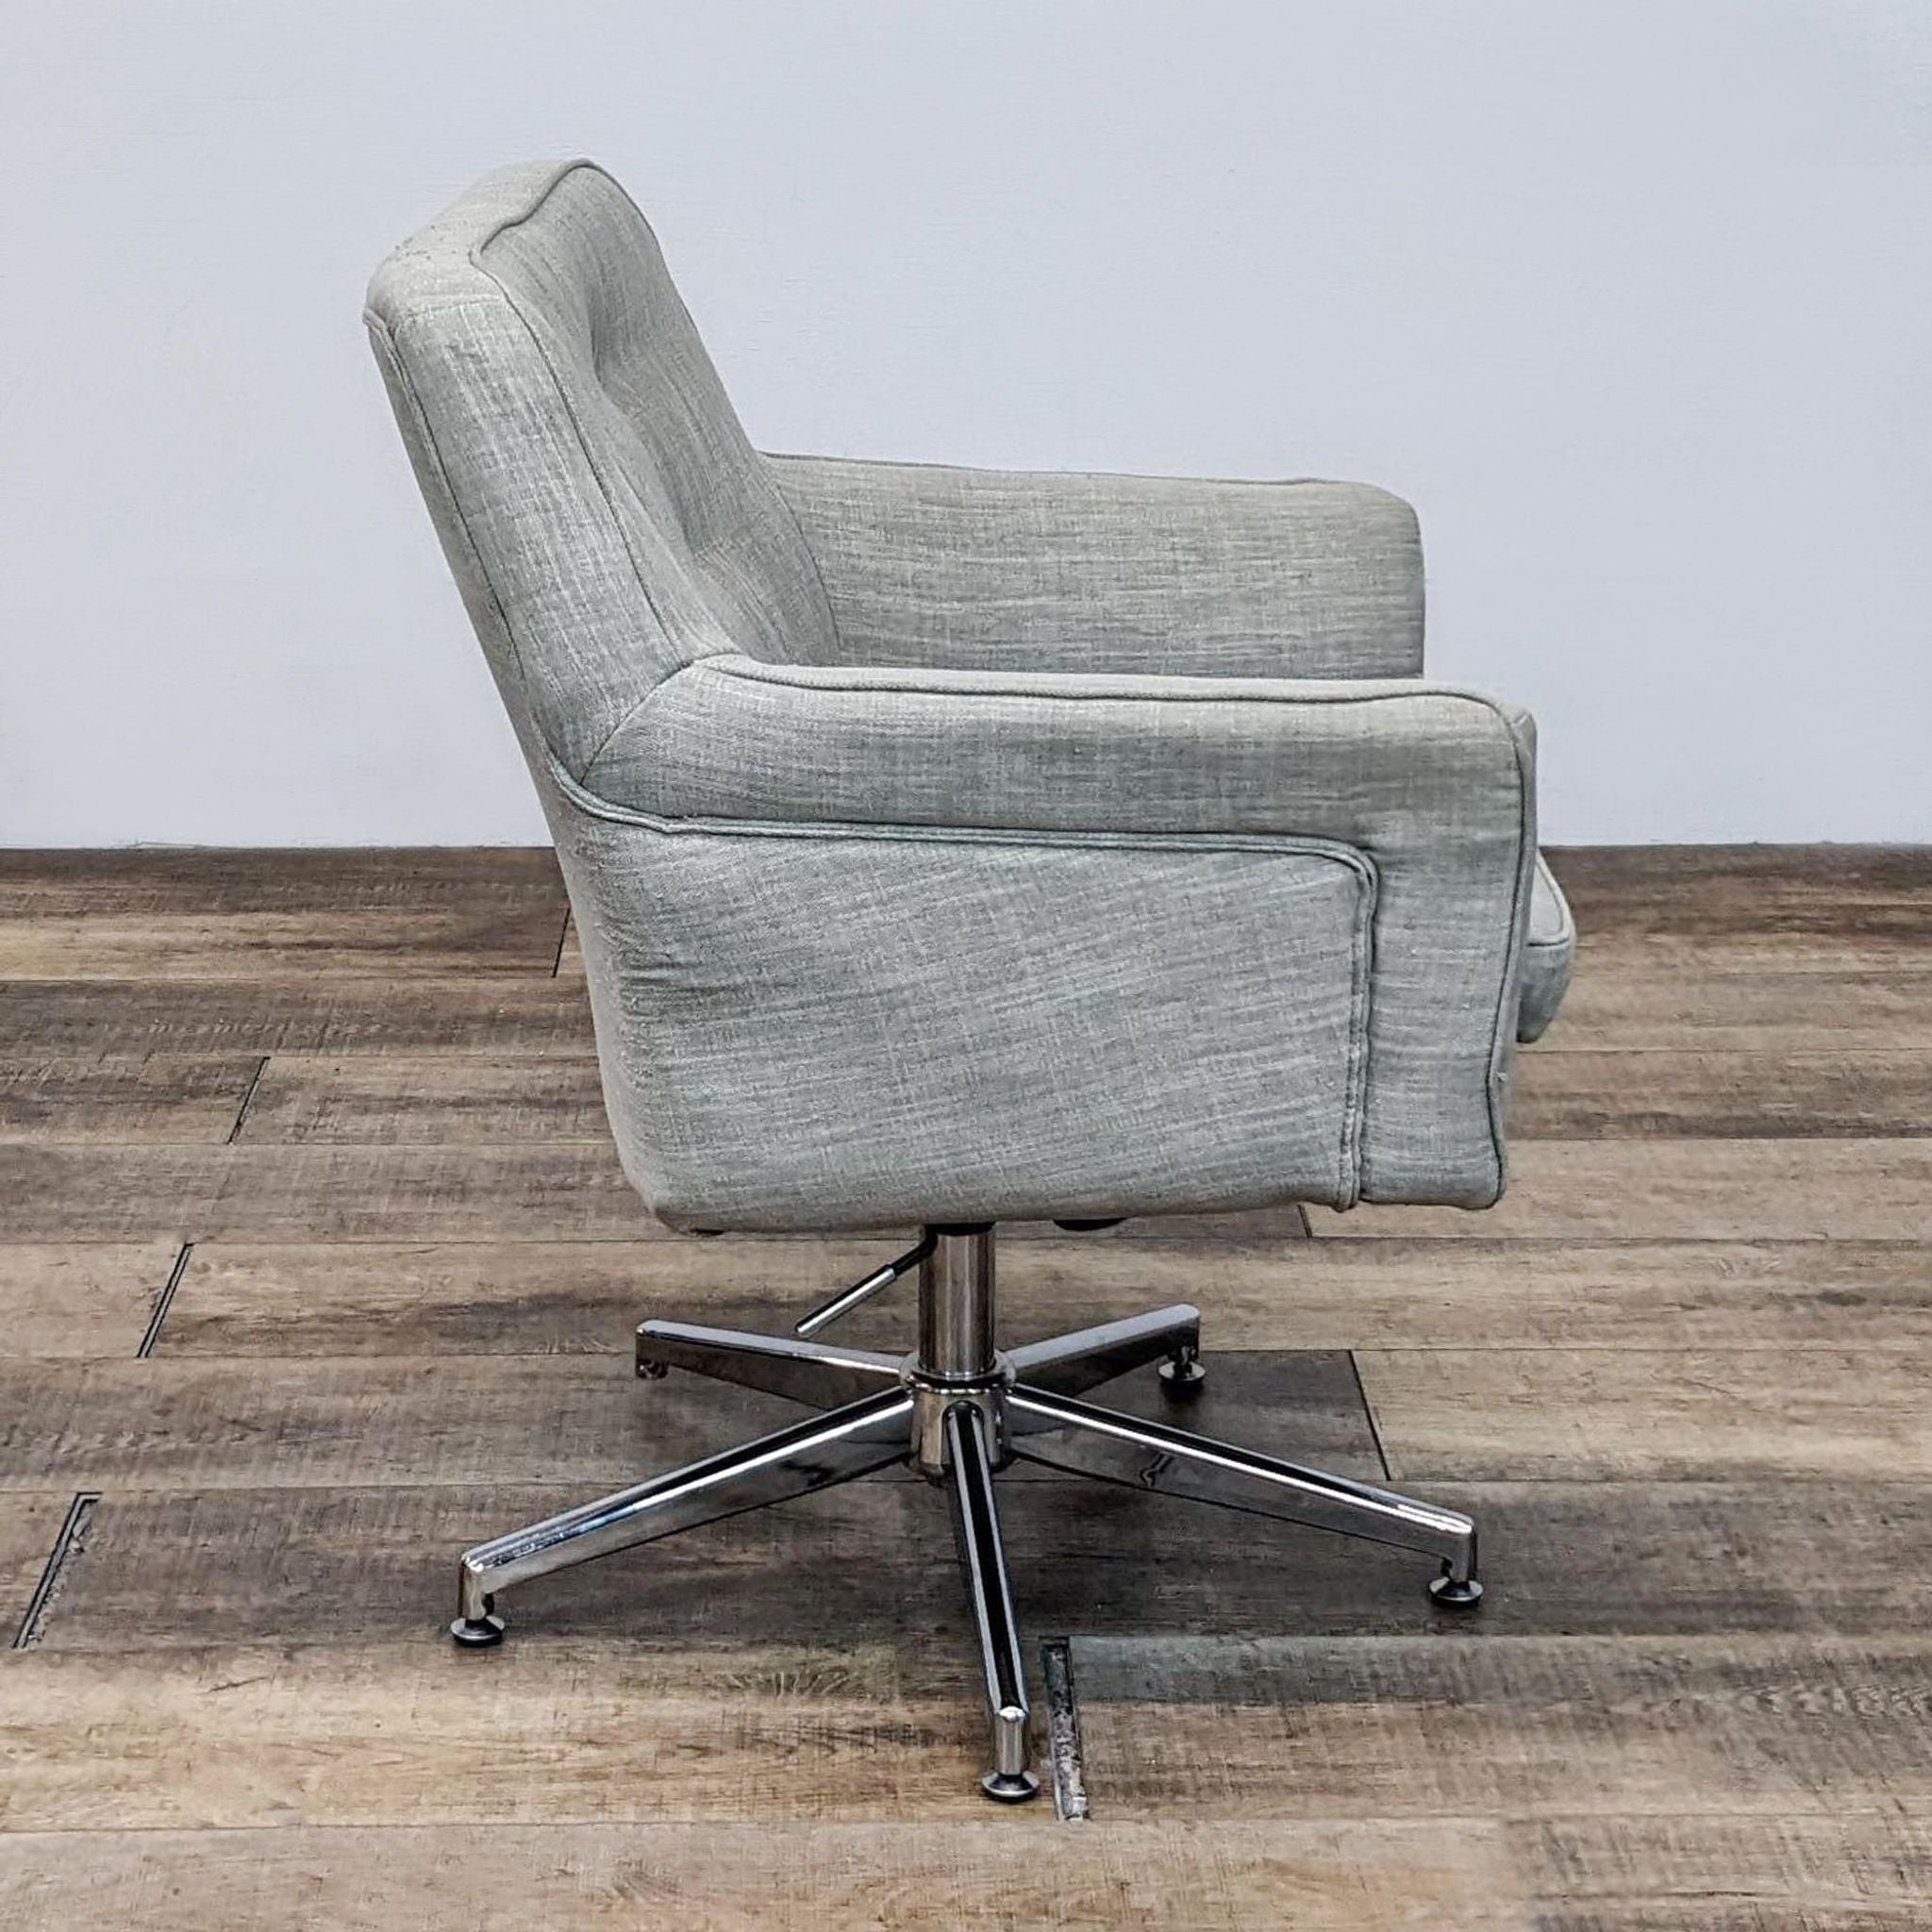 Reperch textured linen armchair, tufted back, side view on a five point chrome base with swivel and height adjustment.